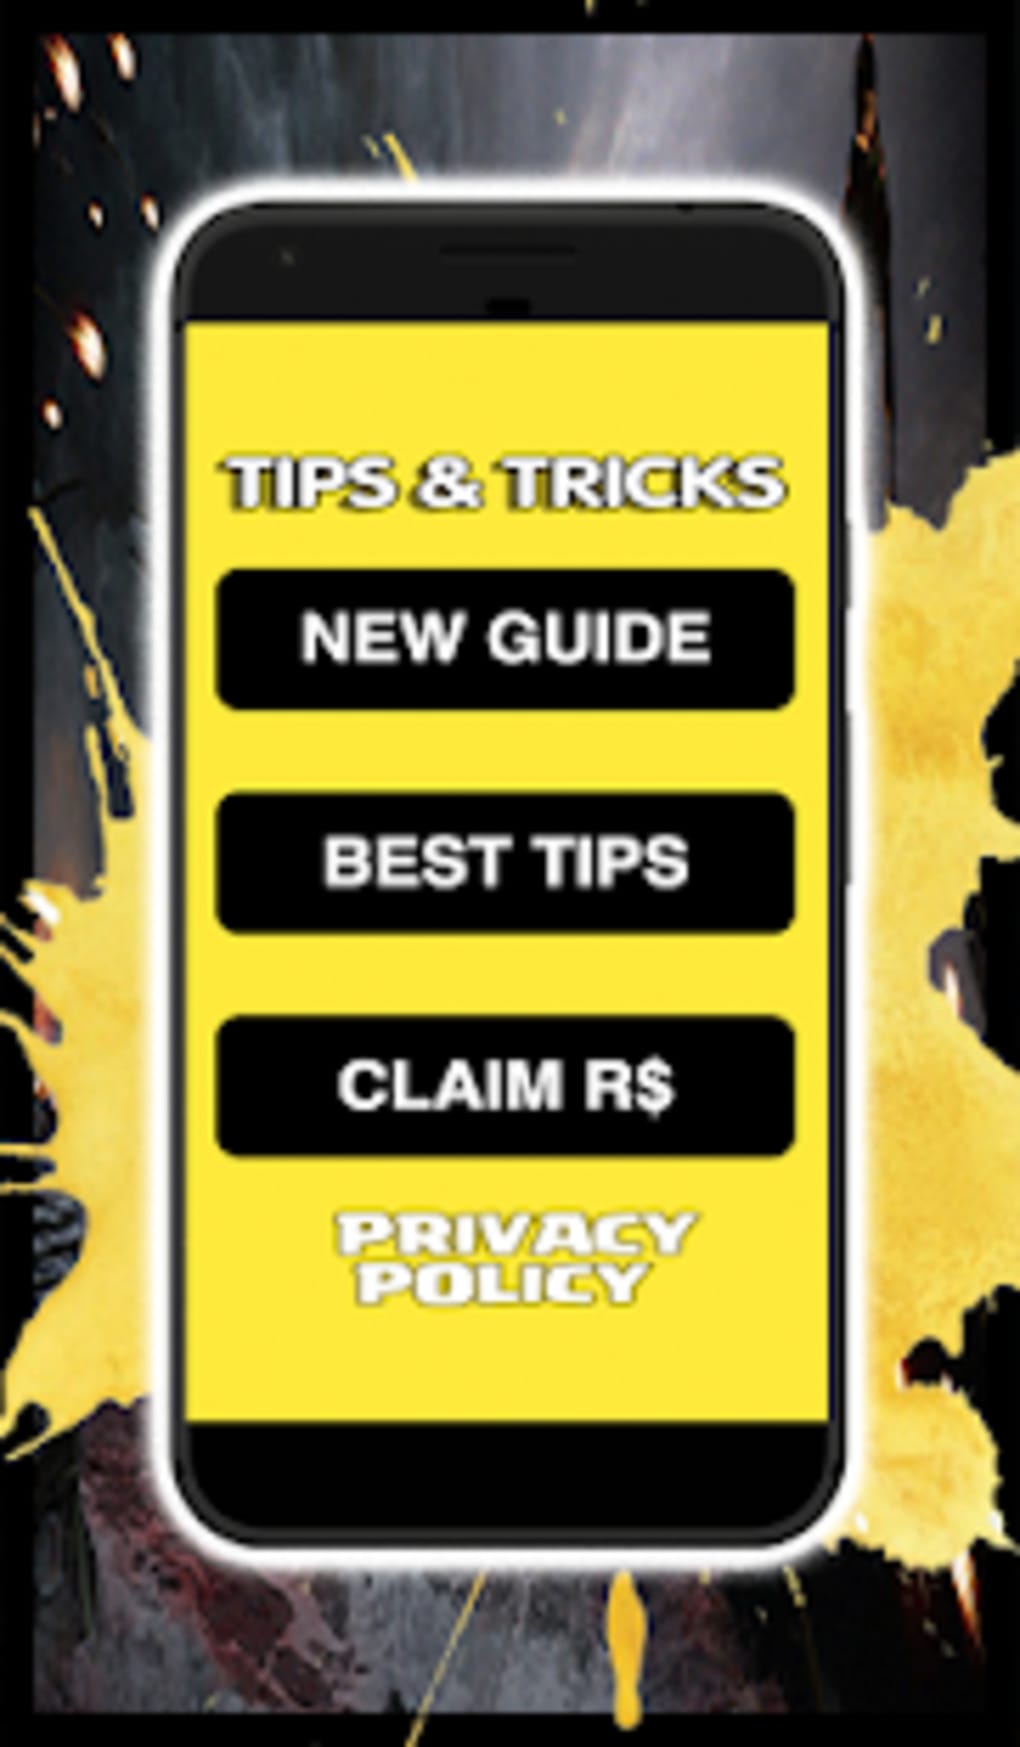 Get Free Robux Pro Tips Guide Robux Free 2k19 Para Android - new free robux tips pro 2k19 for android download